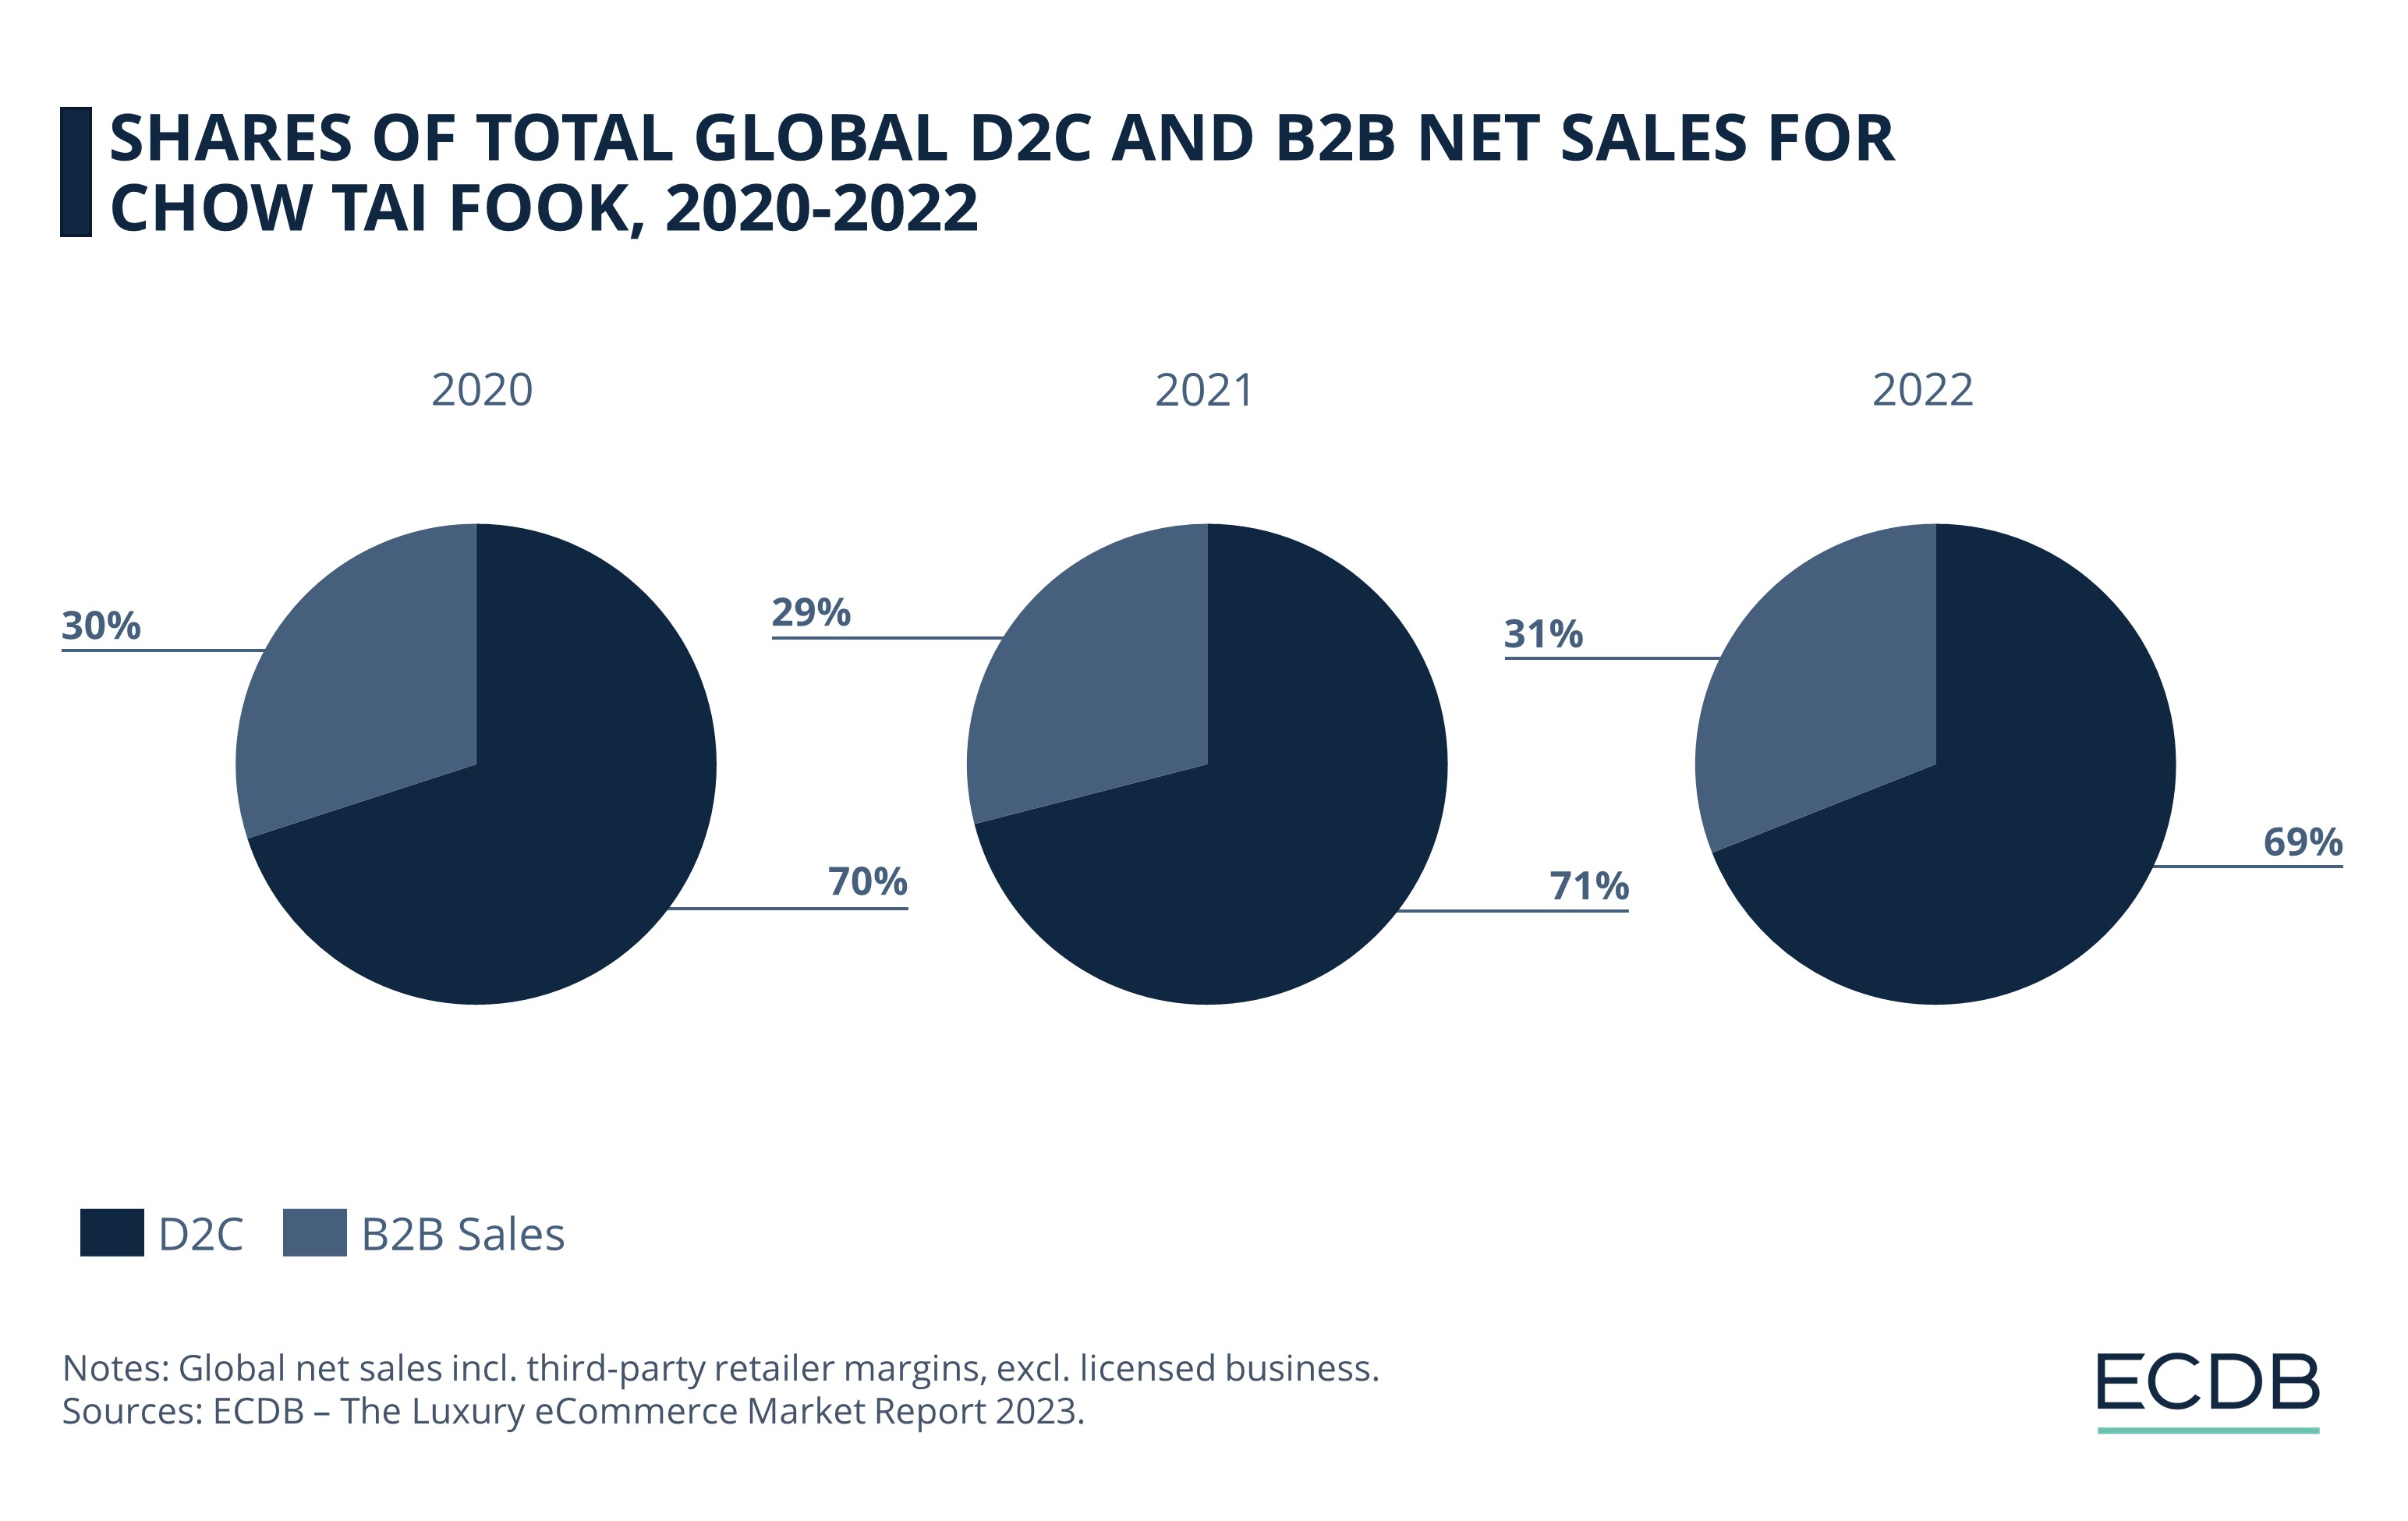 Shares of Total Global D2C and B2B Net Sales for Chow Tai Fook, 2020-2022